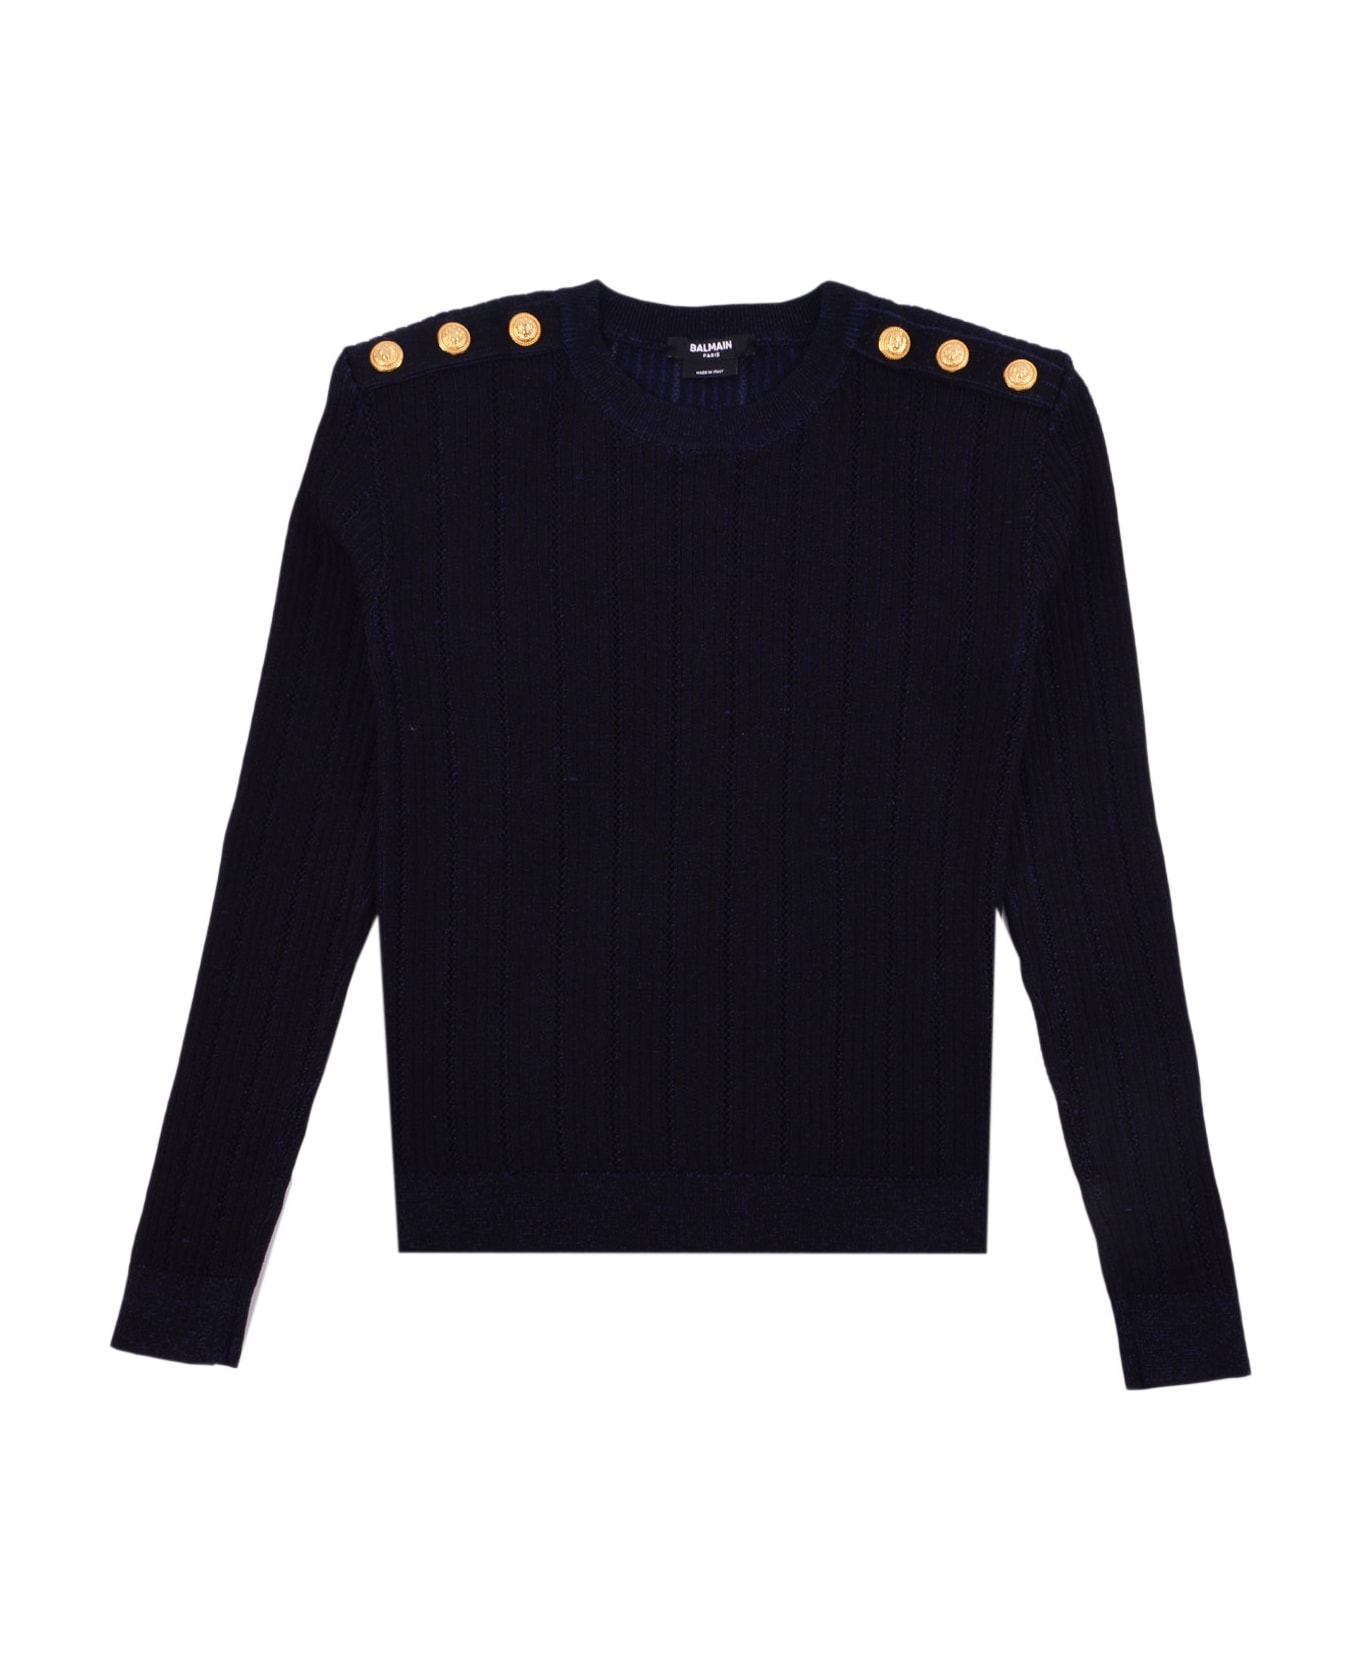 Balmain Sweater With Embossed Buttons - Back